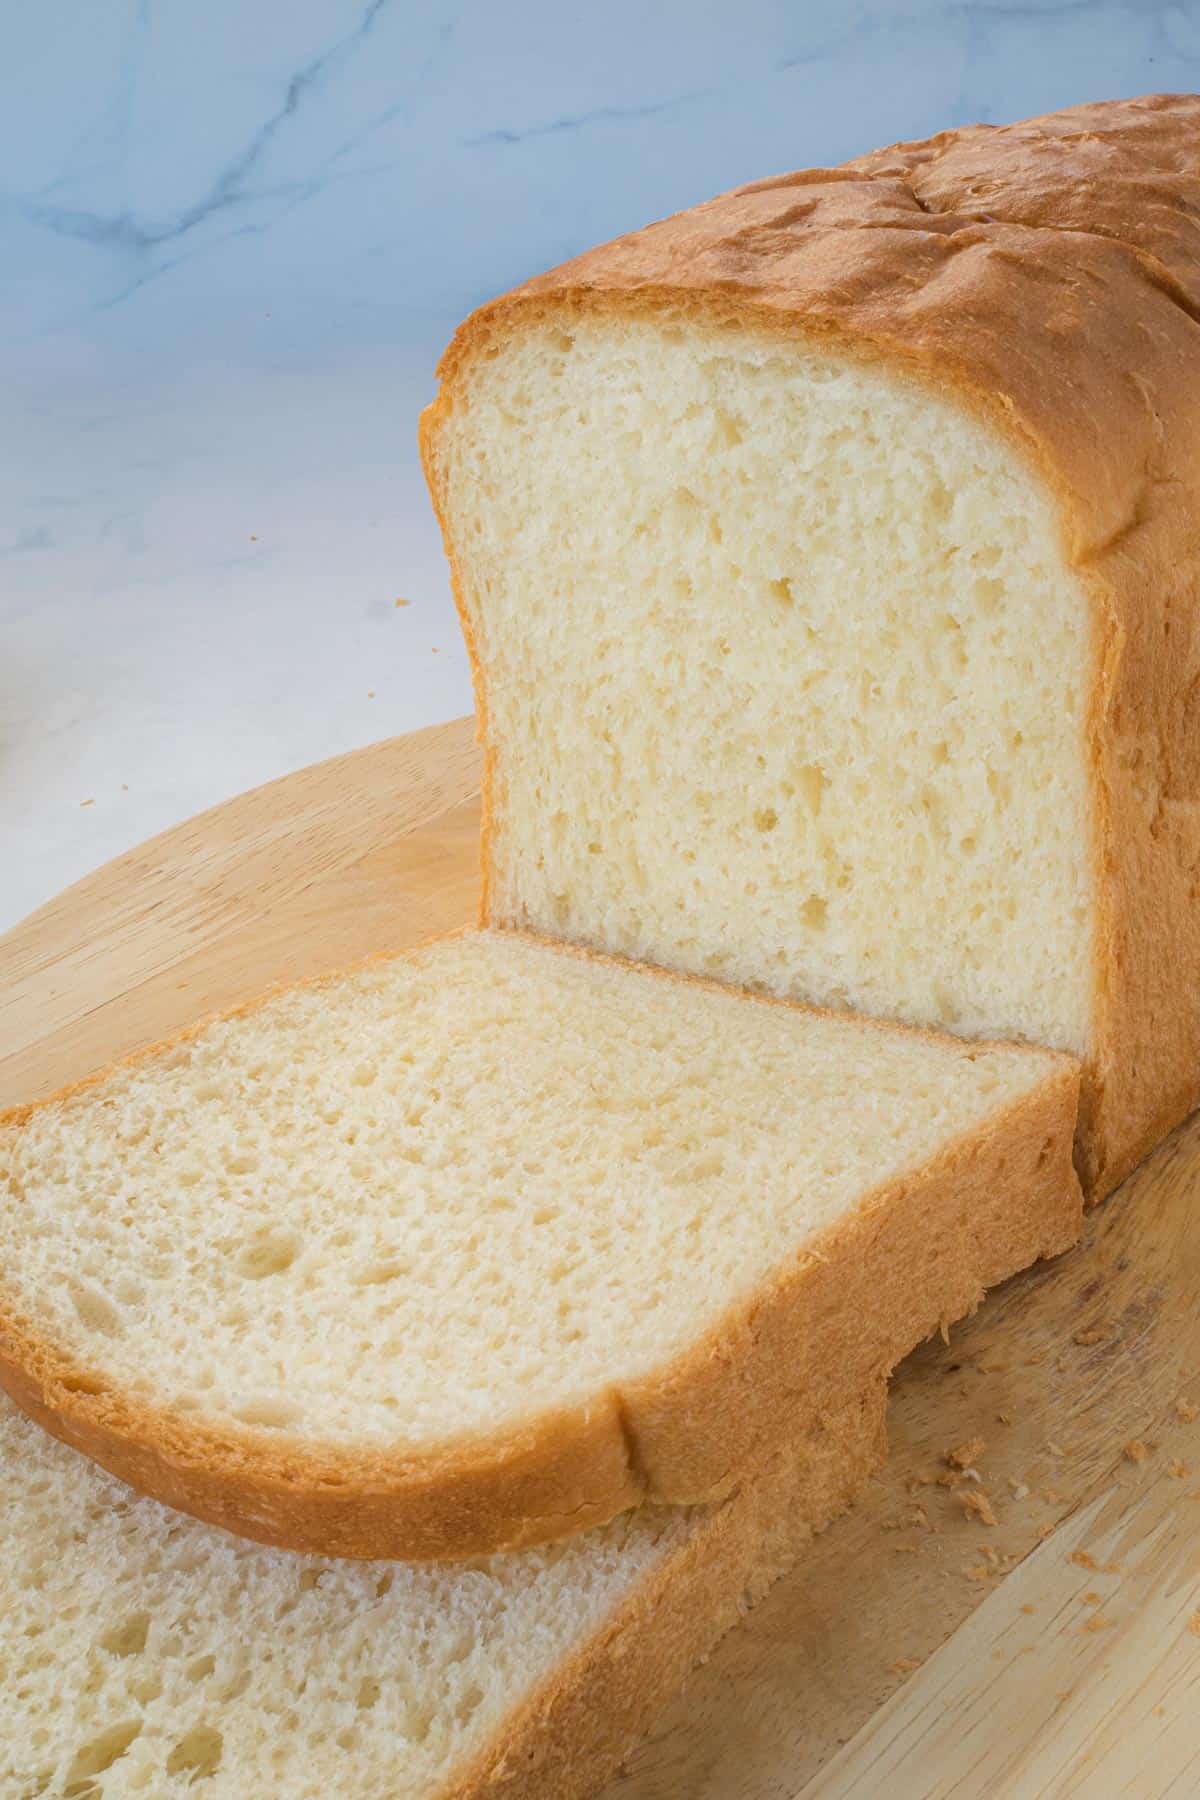 A loaf bread with slice cut out